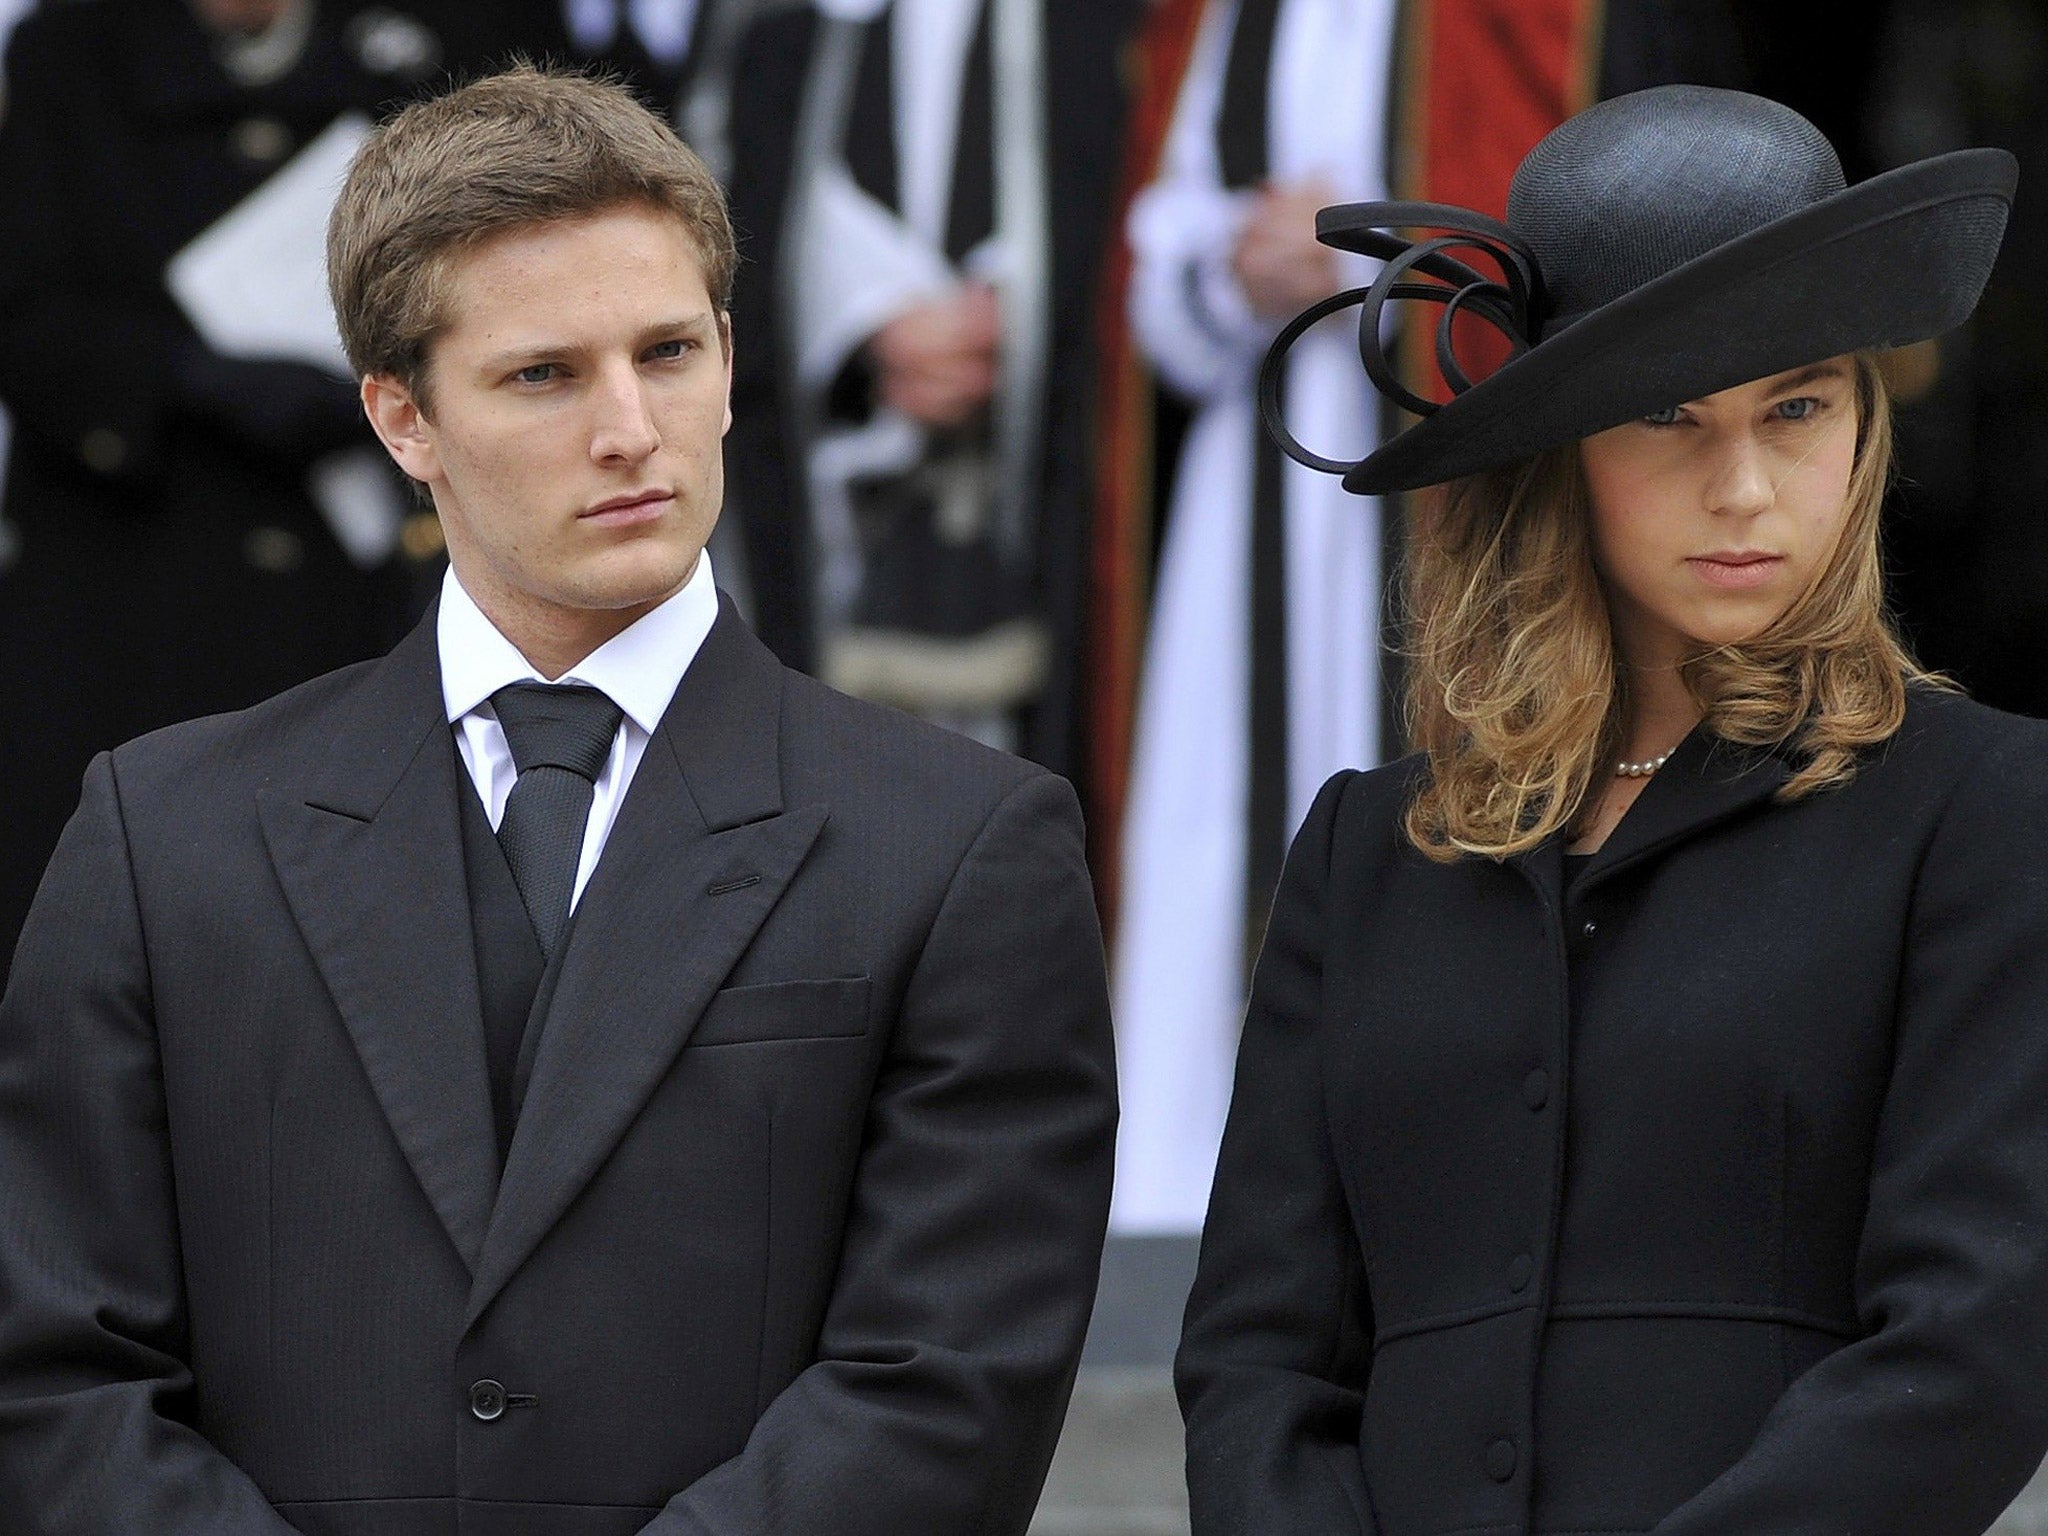 Michael and Amanda Thatcher, grand children of former British prime minister Margaret Thatcher, react as they leave her funeral service at St Paul's Cathedral